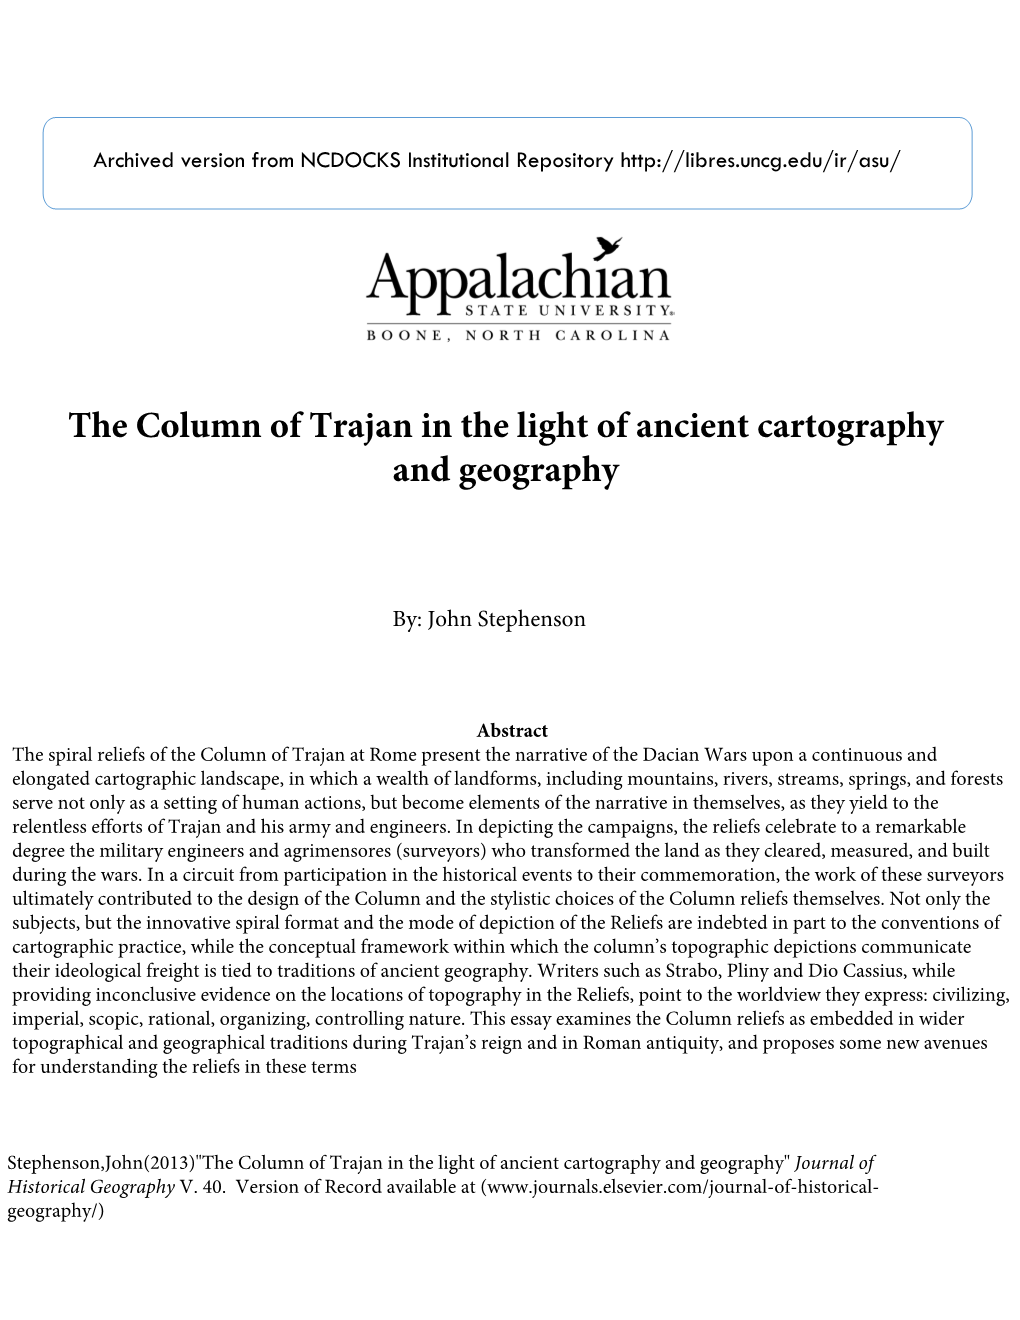 The Column of Trajan in the Light of Ancient Cartography and Geography